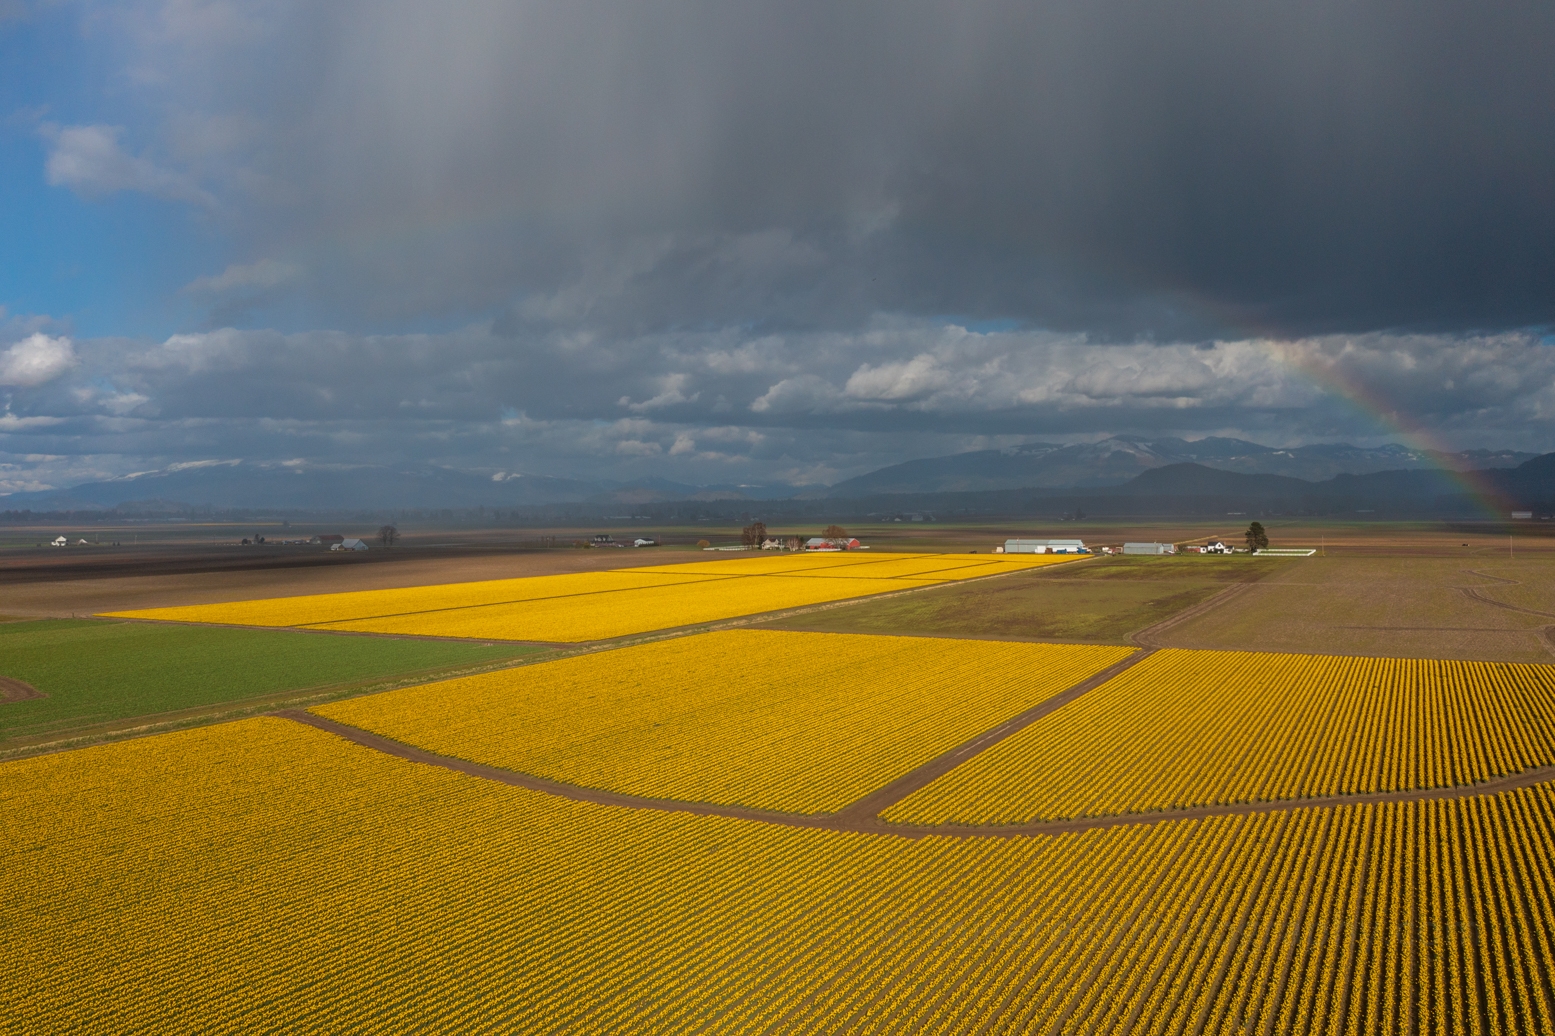 Over the Skagit Valley Daffodil Fields and Clouds